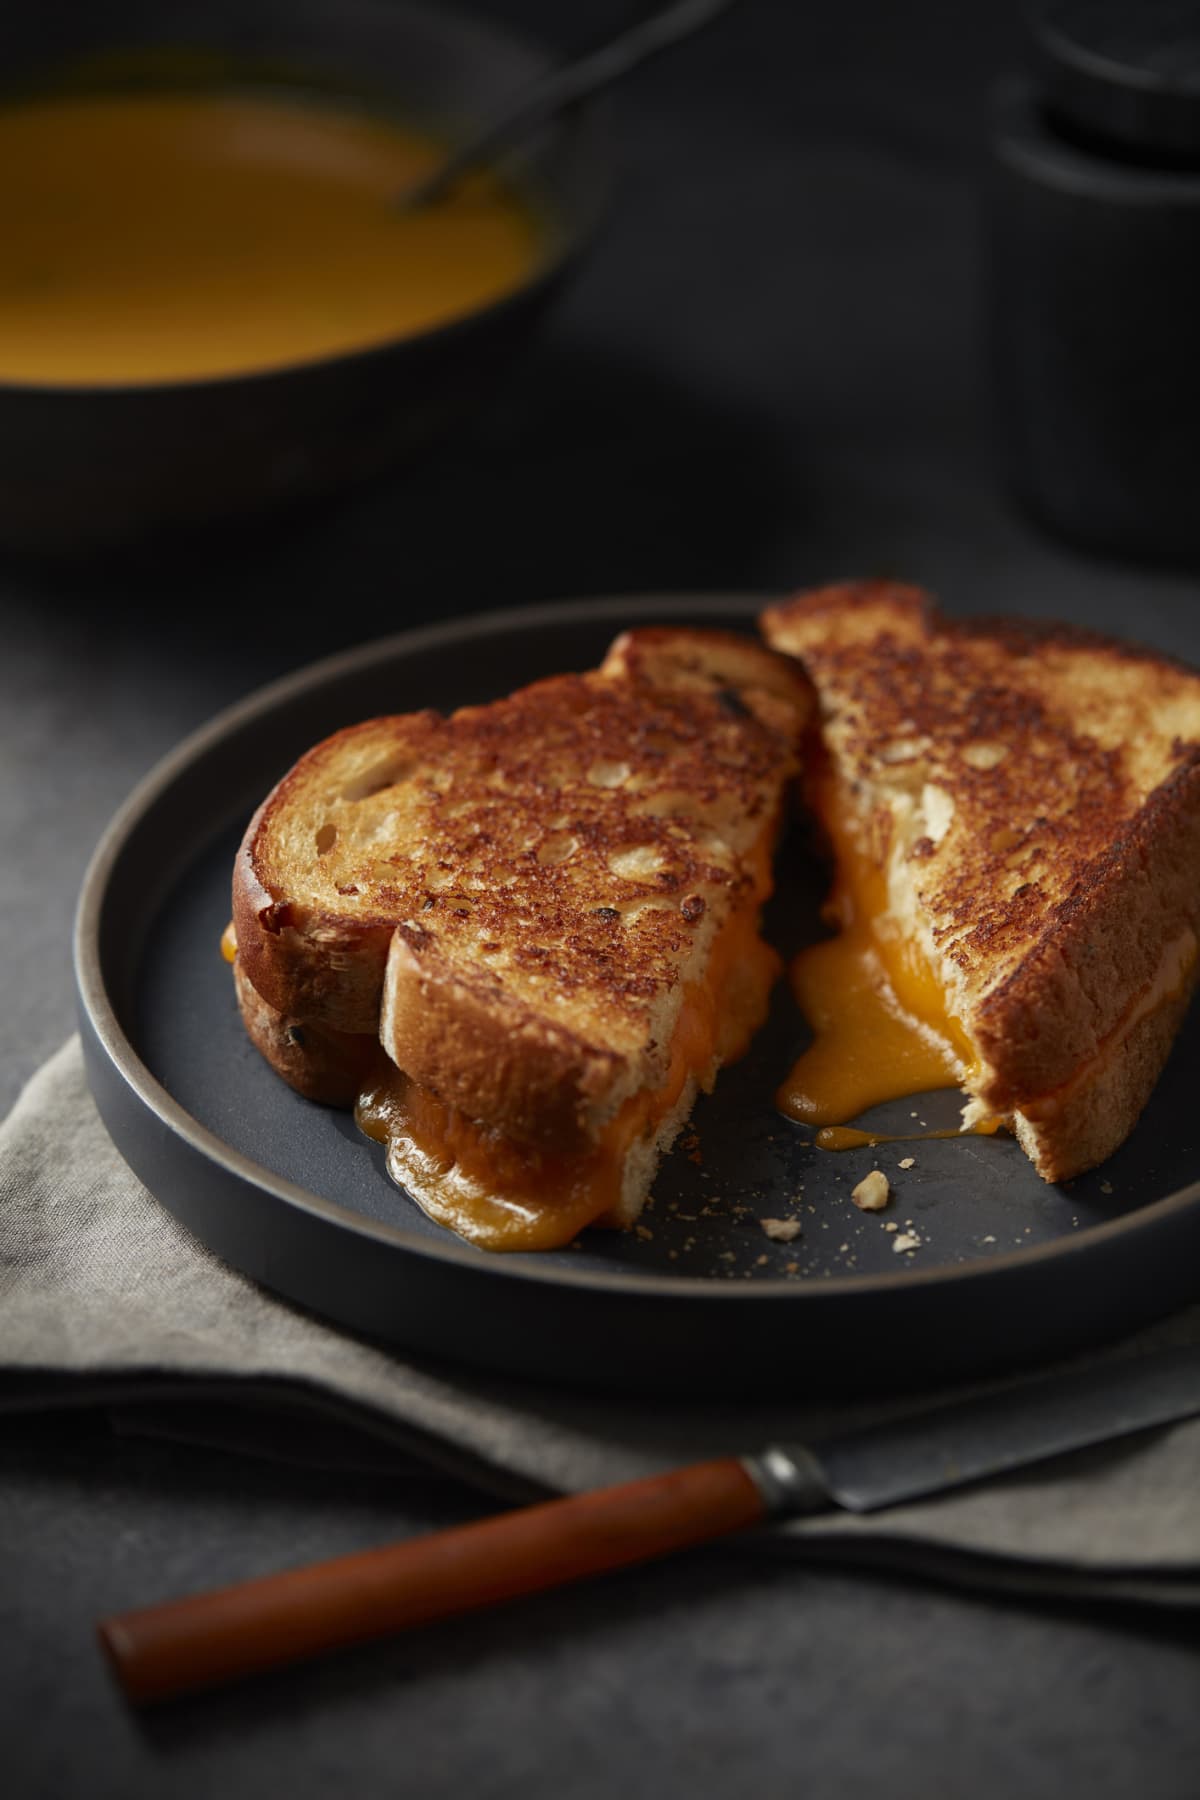 Grilled cheese sandwich in frying pan on stove